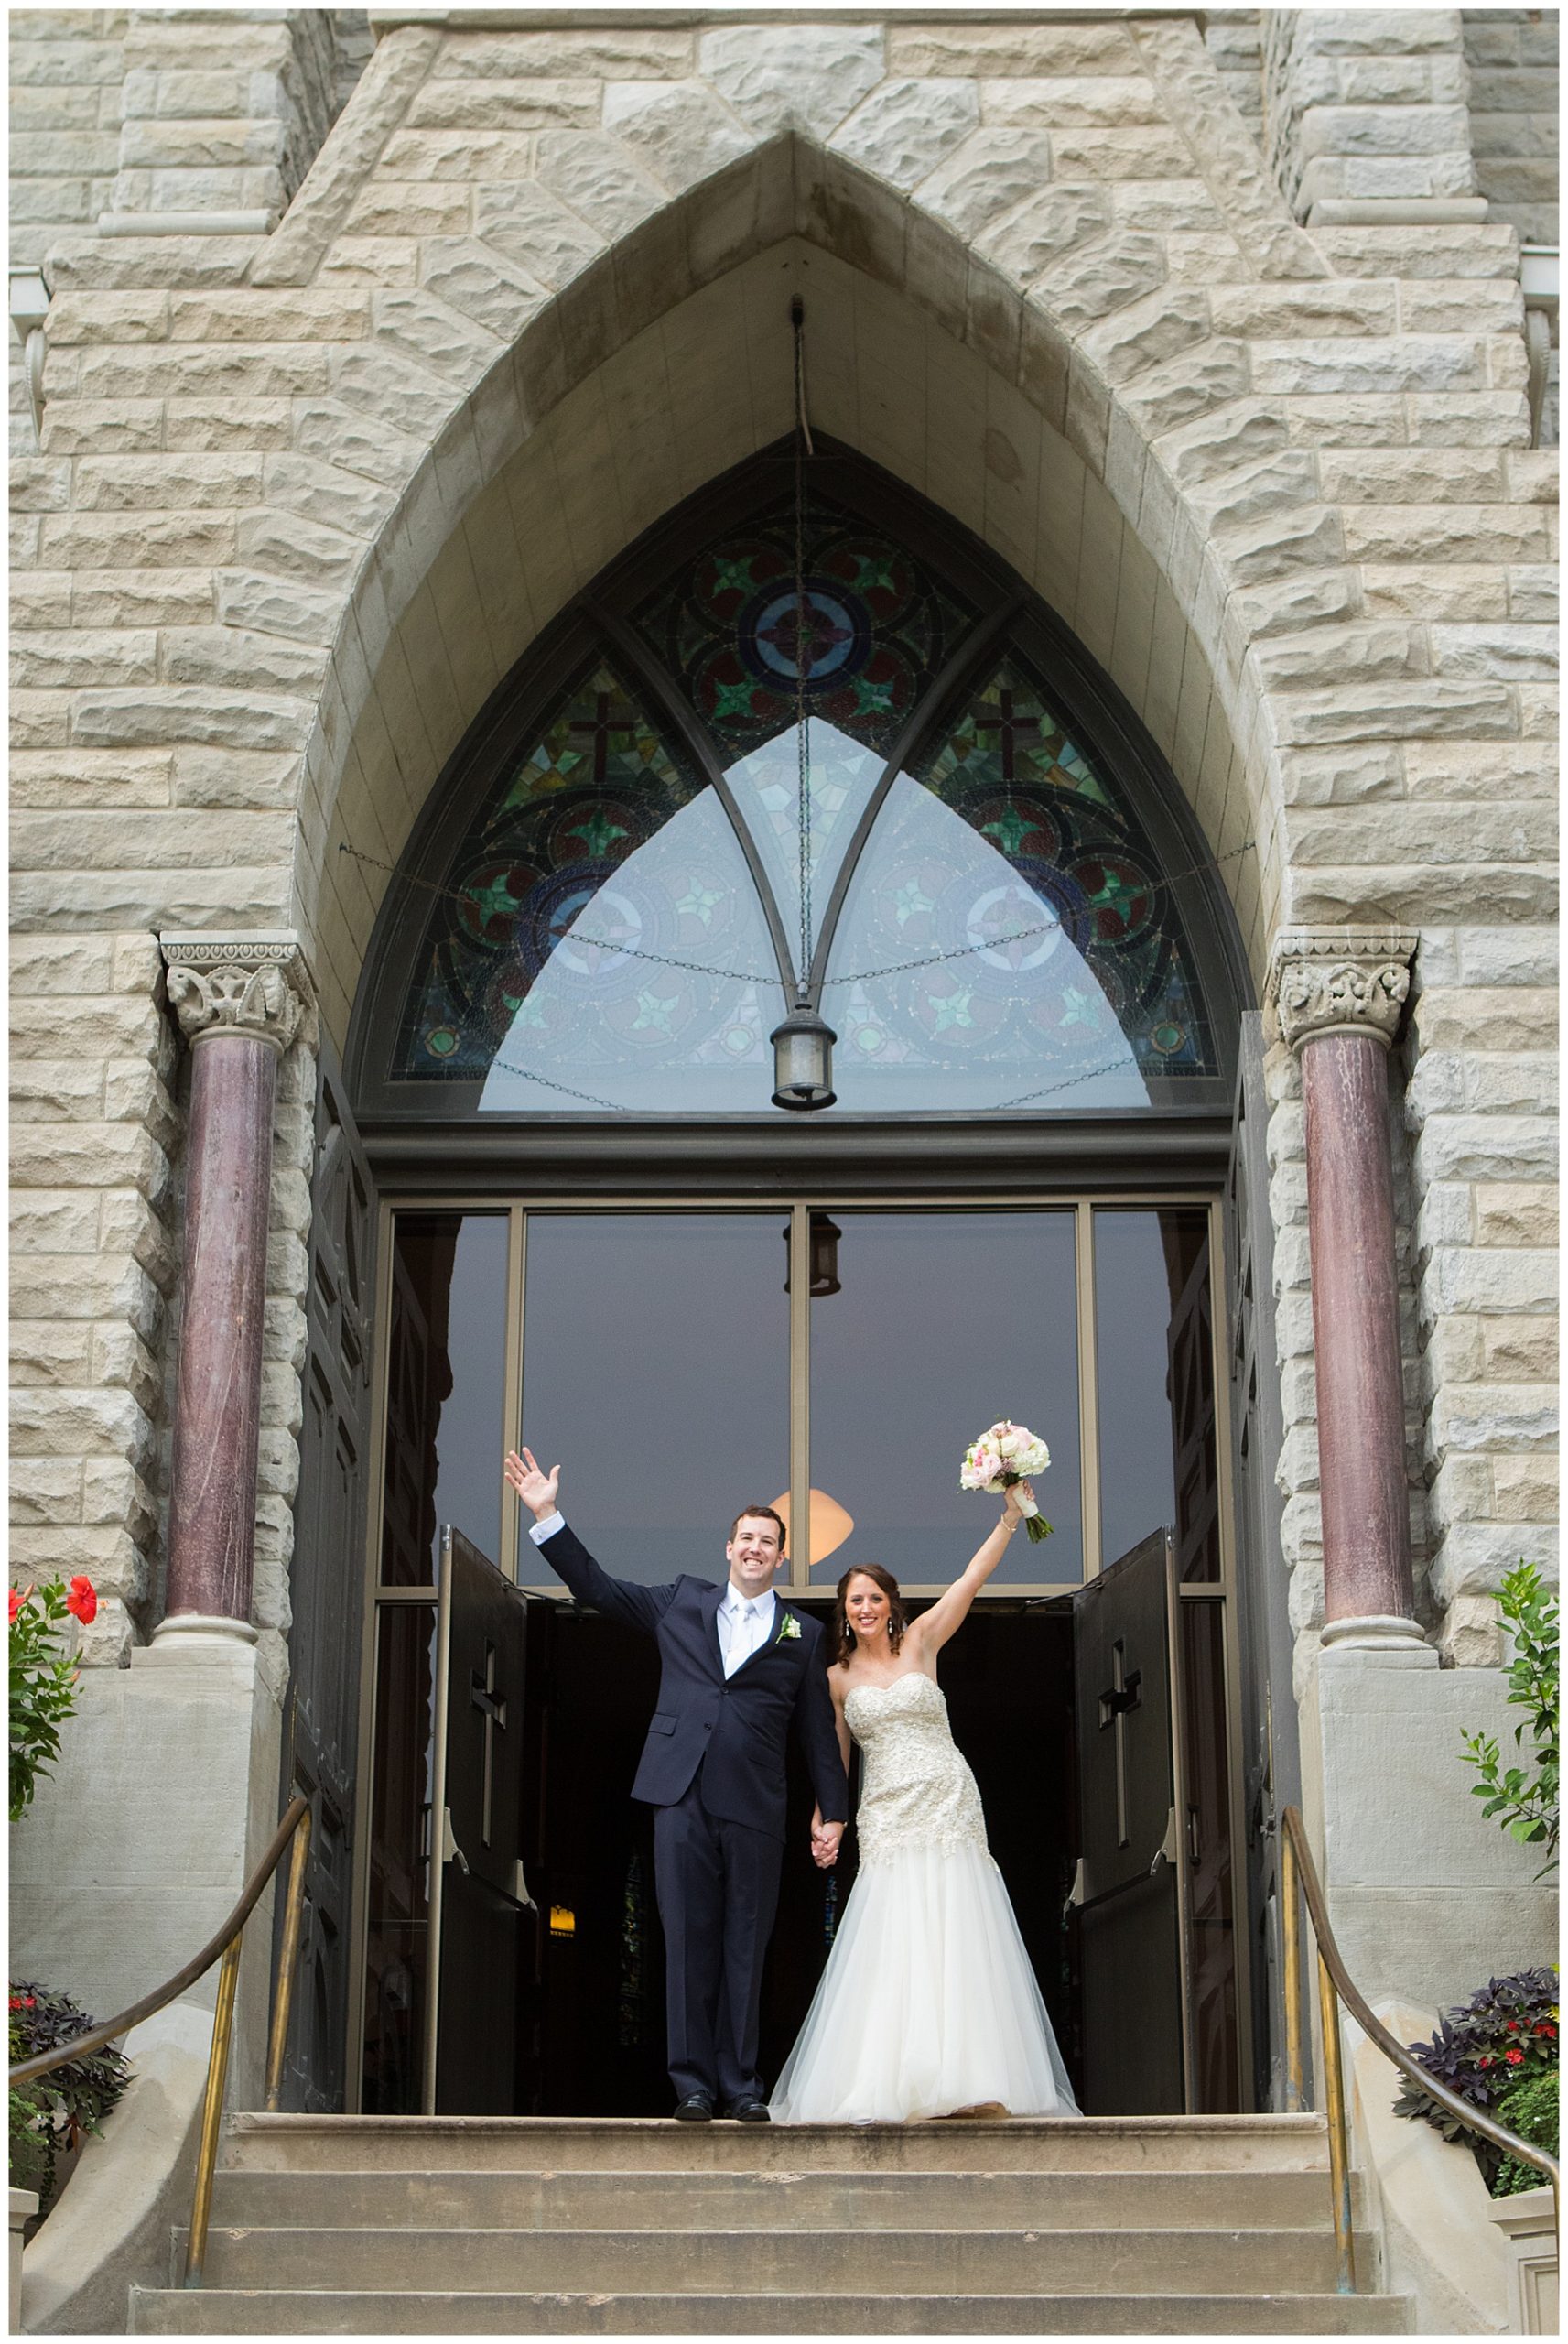 Wedding at St. John's Church at Creighton,Reception at Livestock Exchange Building Andrea Bibeault: a wedding photojournalist specializes in real,photojournalistic wedding photography. Based in Omaha,we travel all over the midwest and country.,